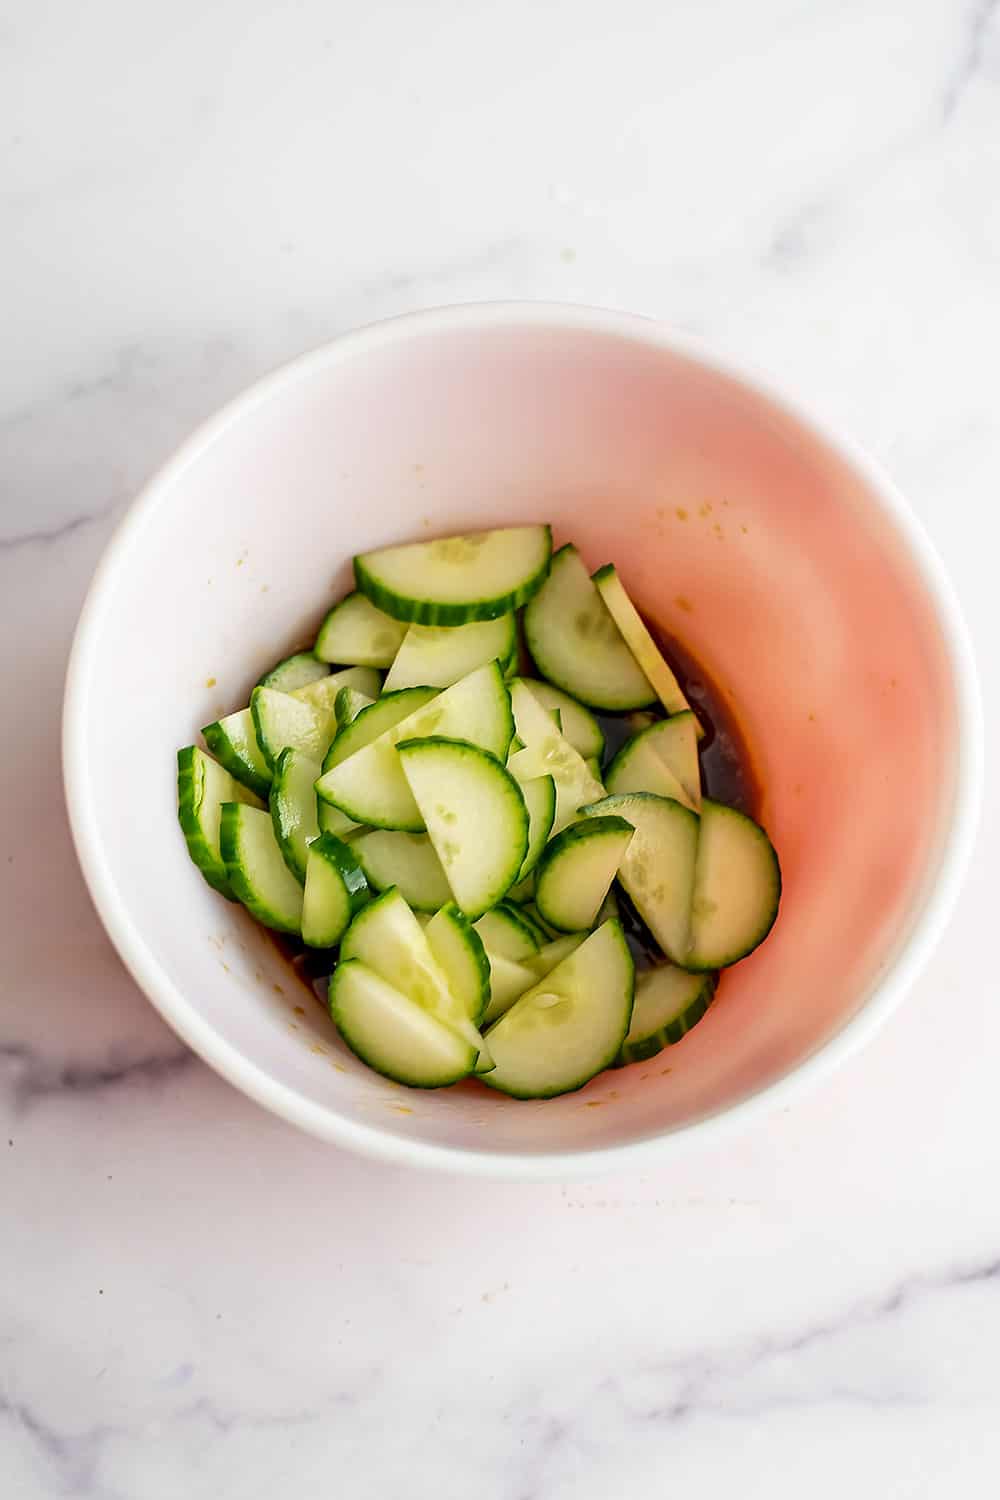 Sliced cucumber in a bowl before marinating.